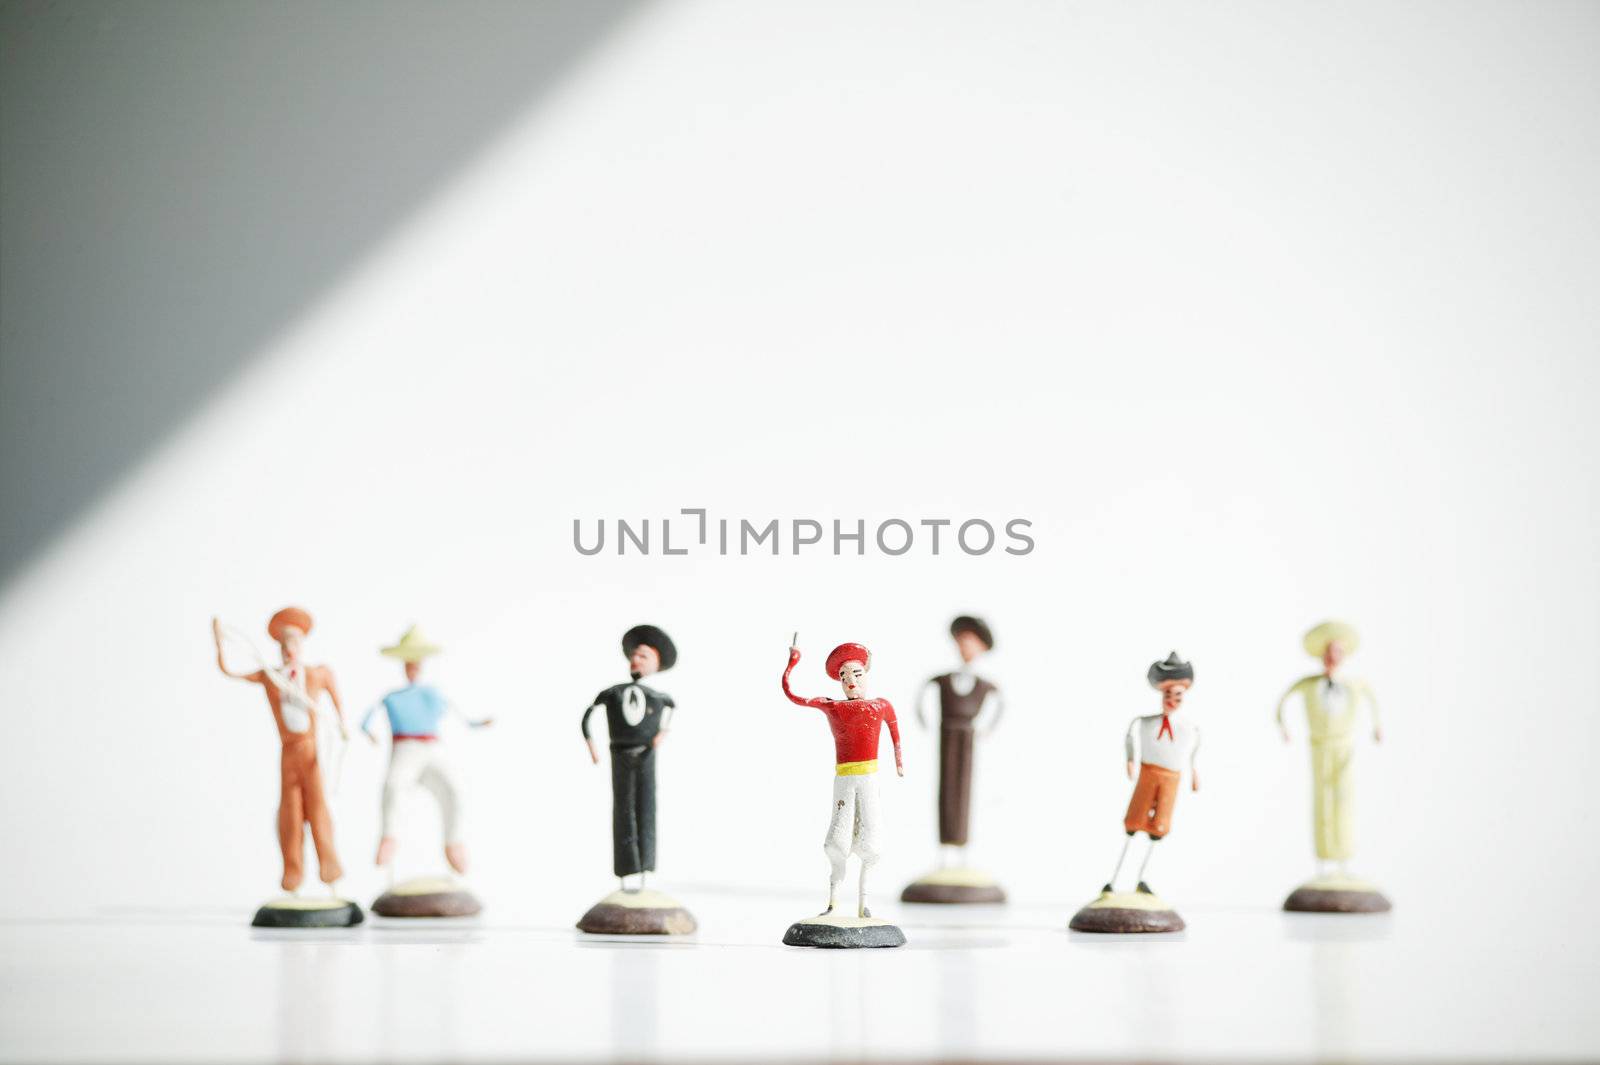 Whimsical mexican clay toy cowboys on a white background.